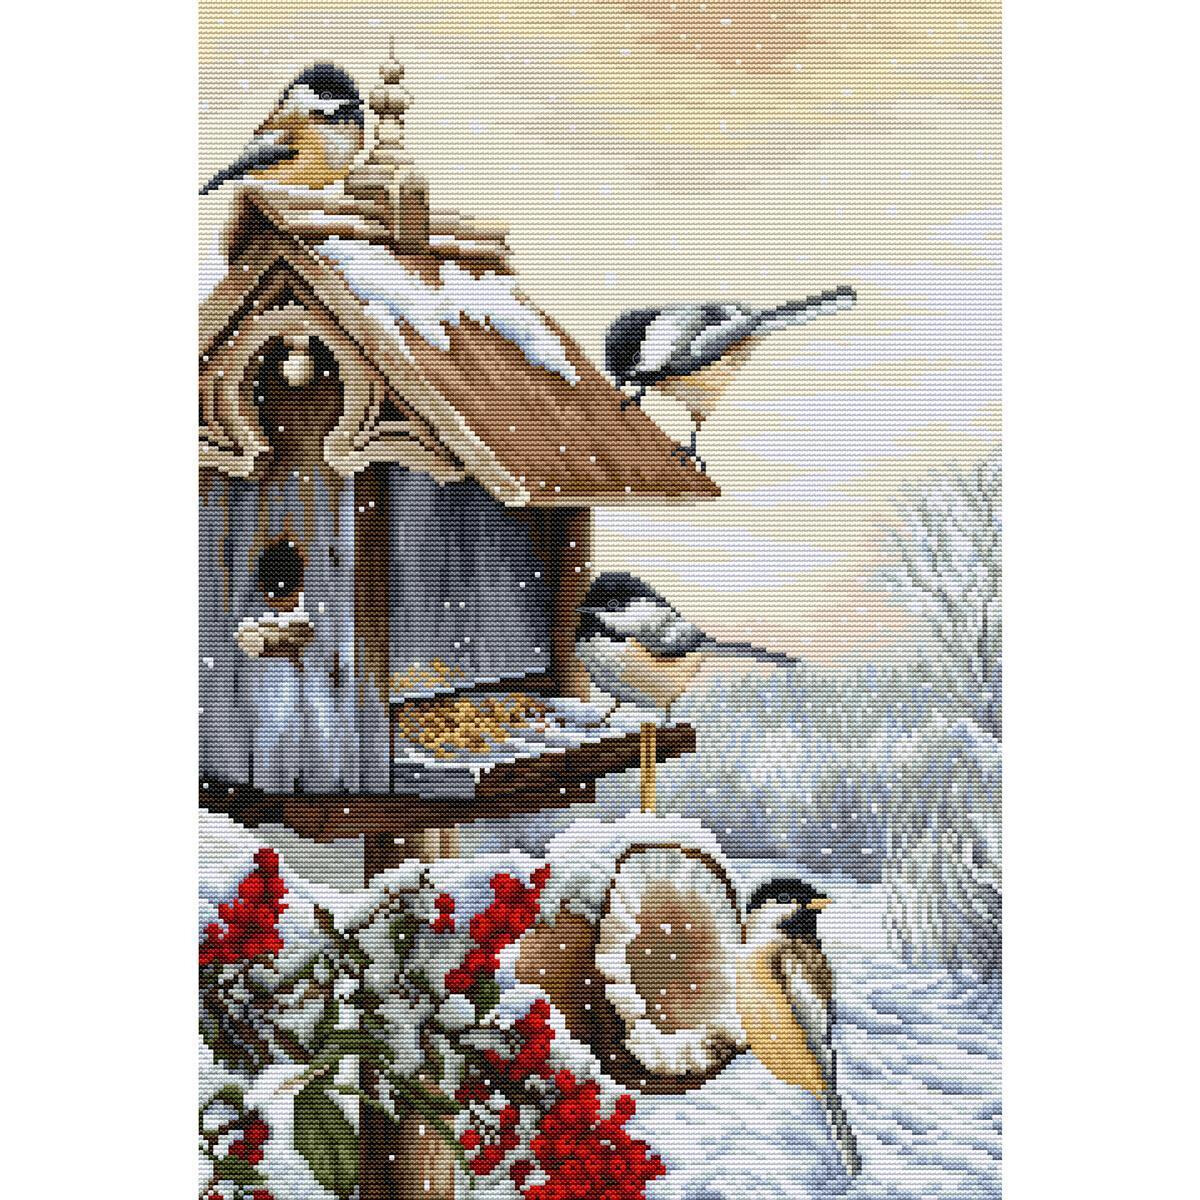 A snow-covered birdhouse is surrounded by four birds on a...